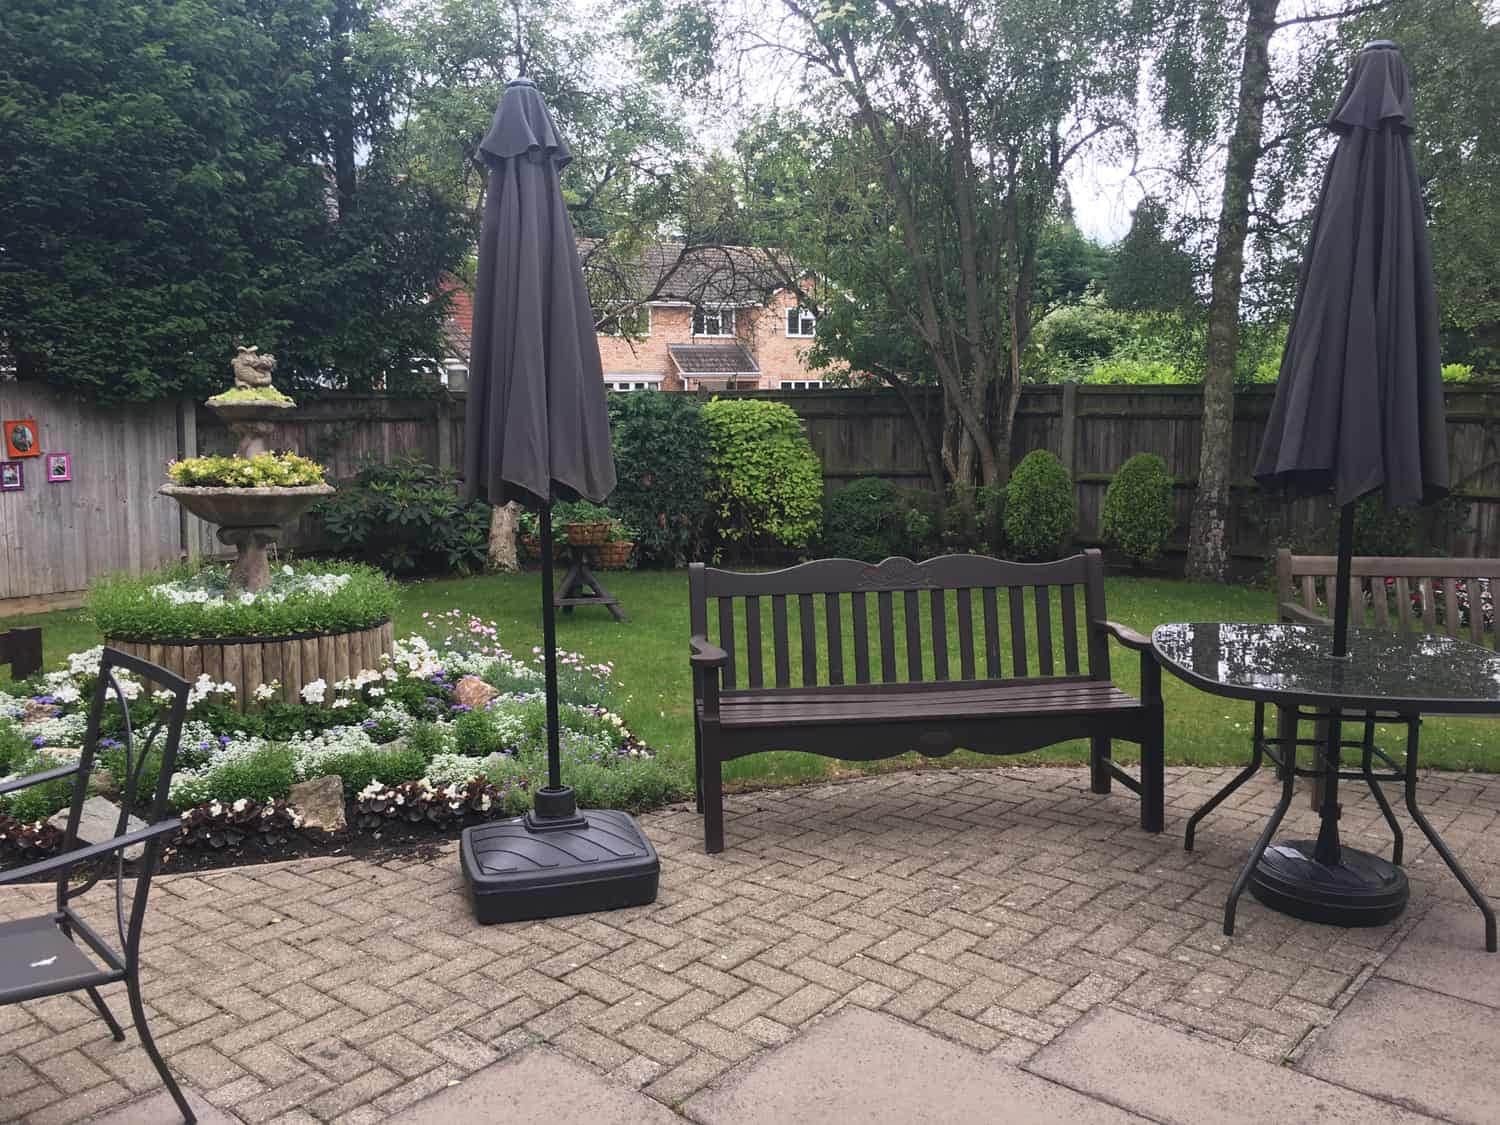 A tranquil garden patio with closed umbrellas, a wooden bench, and a table surrounded by blooming flowers, lush greenery, and contemporary art exhibits.